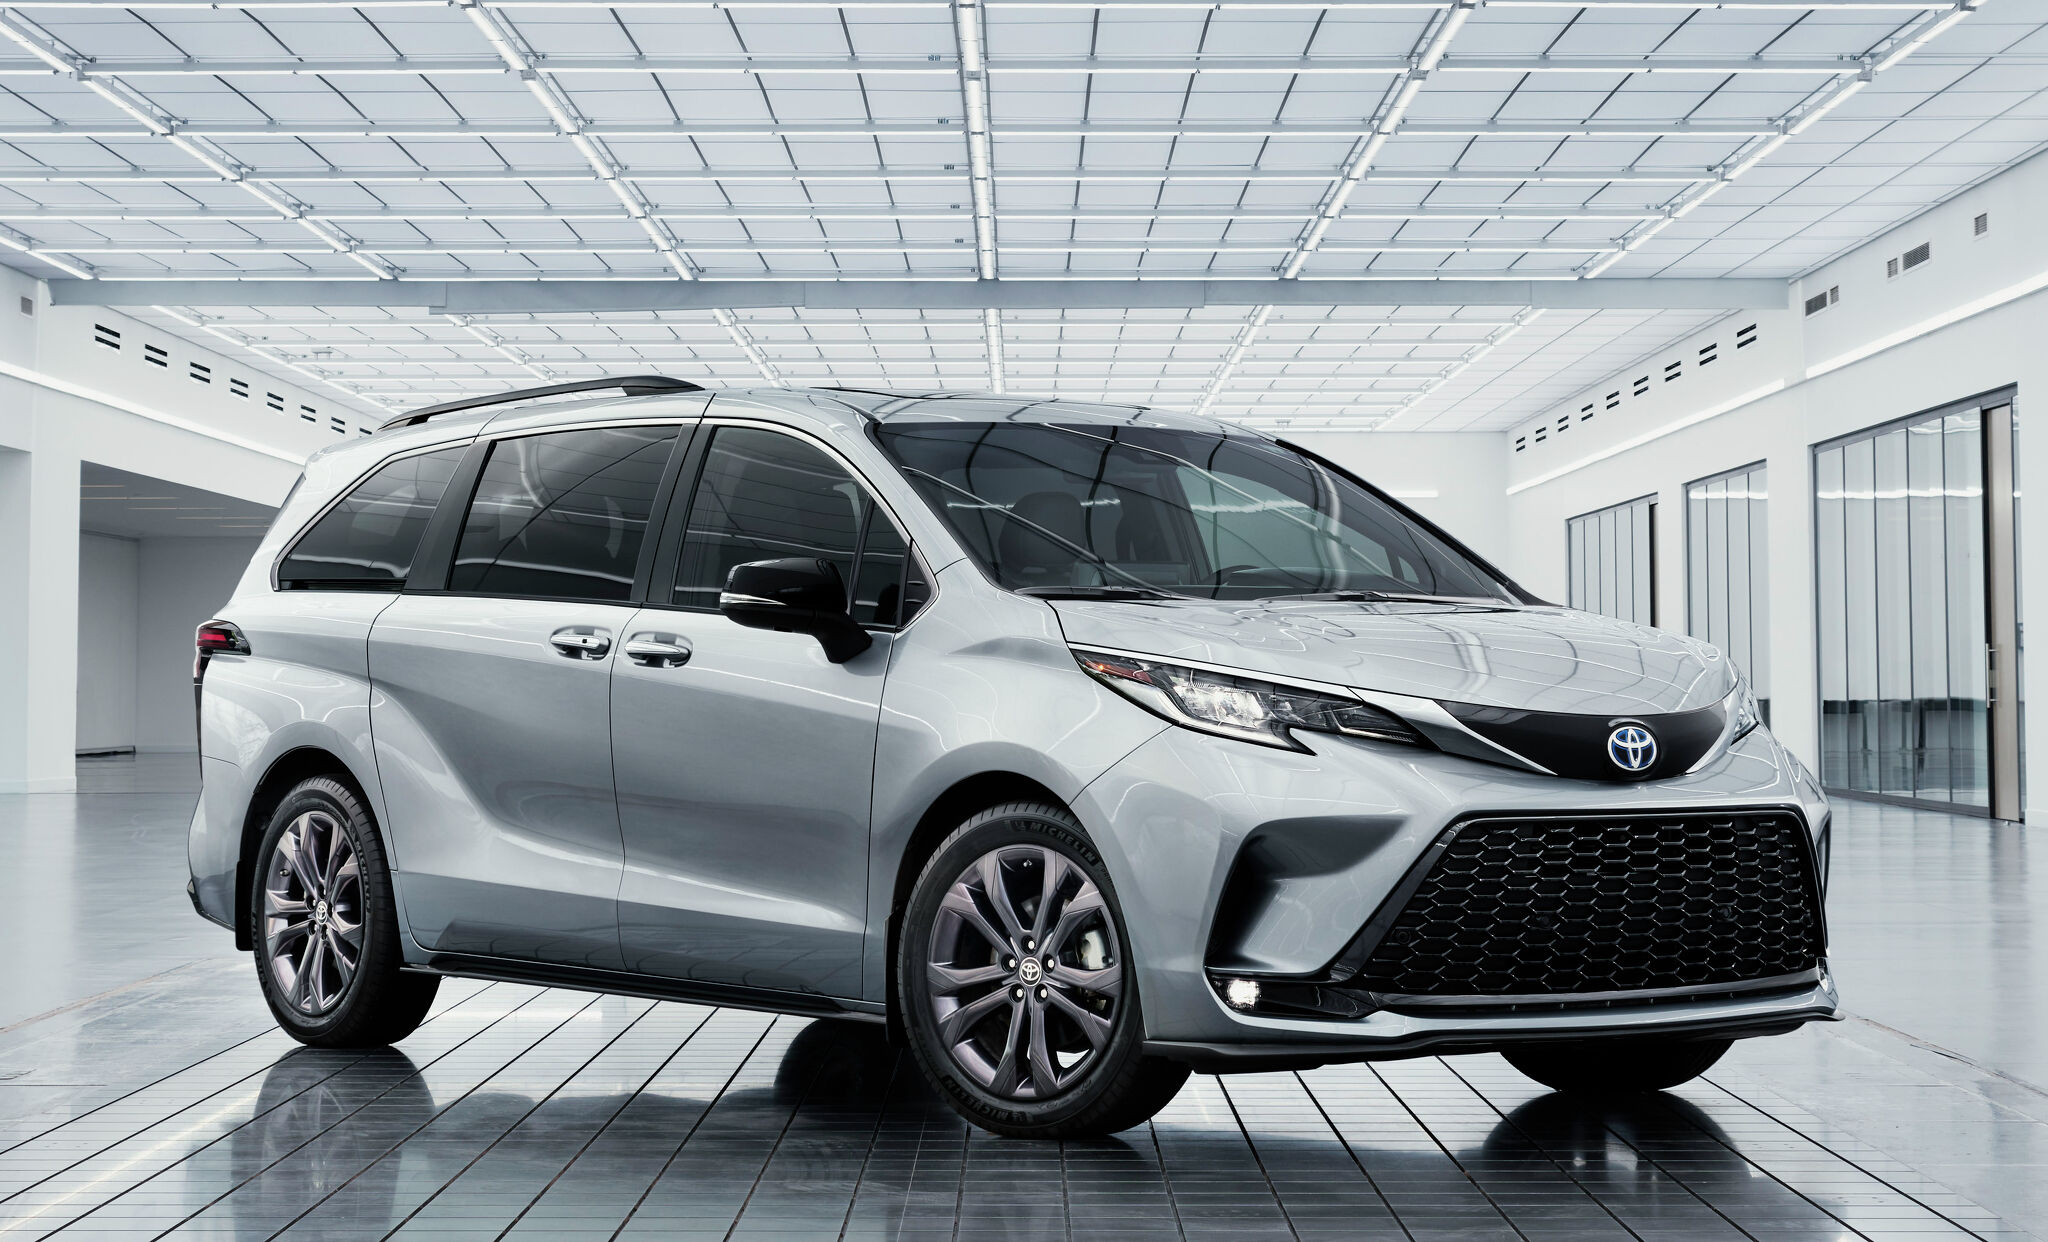 The newest minivan Toyota Sienna is equipped with a hybrid powertrain